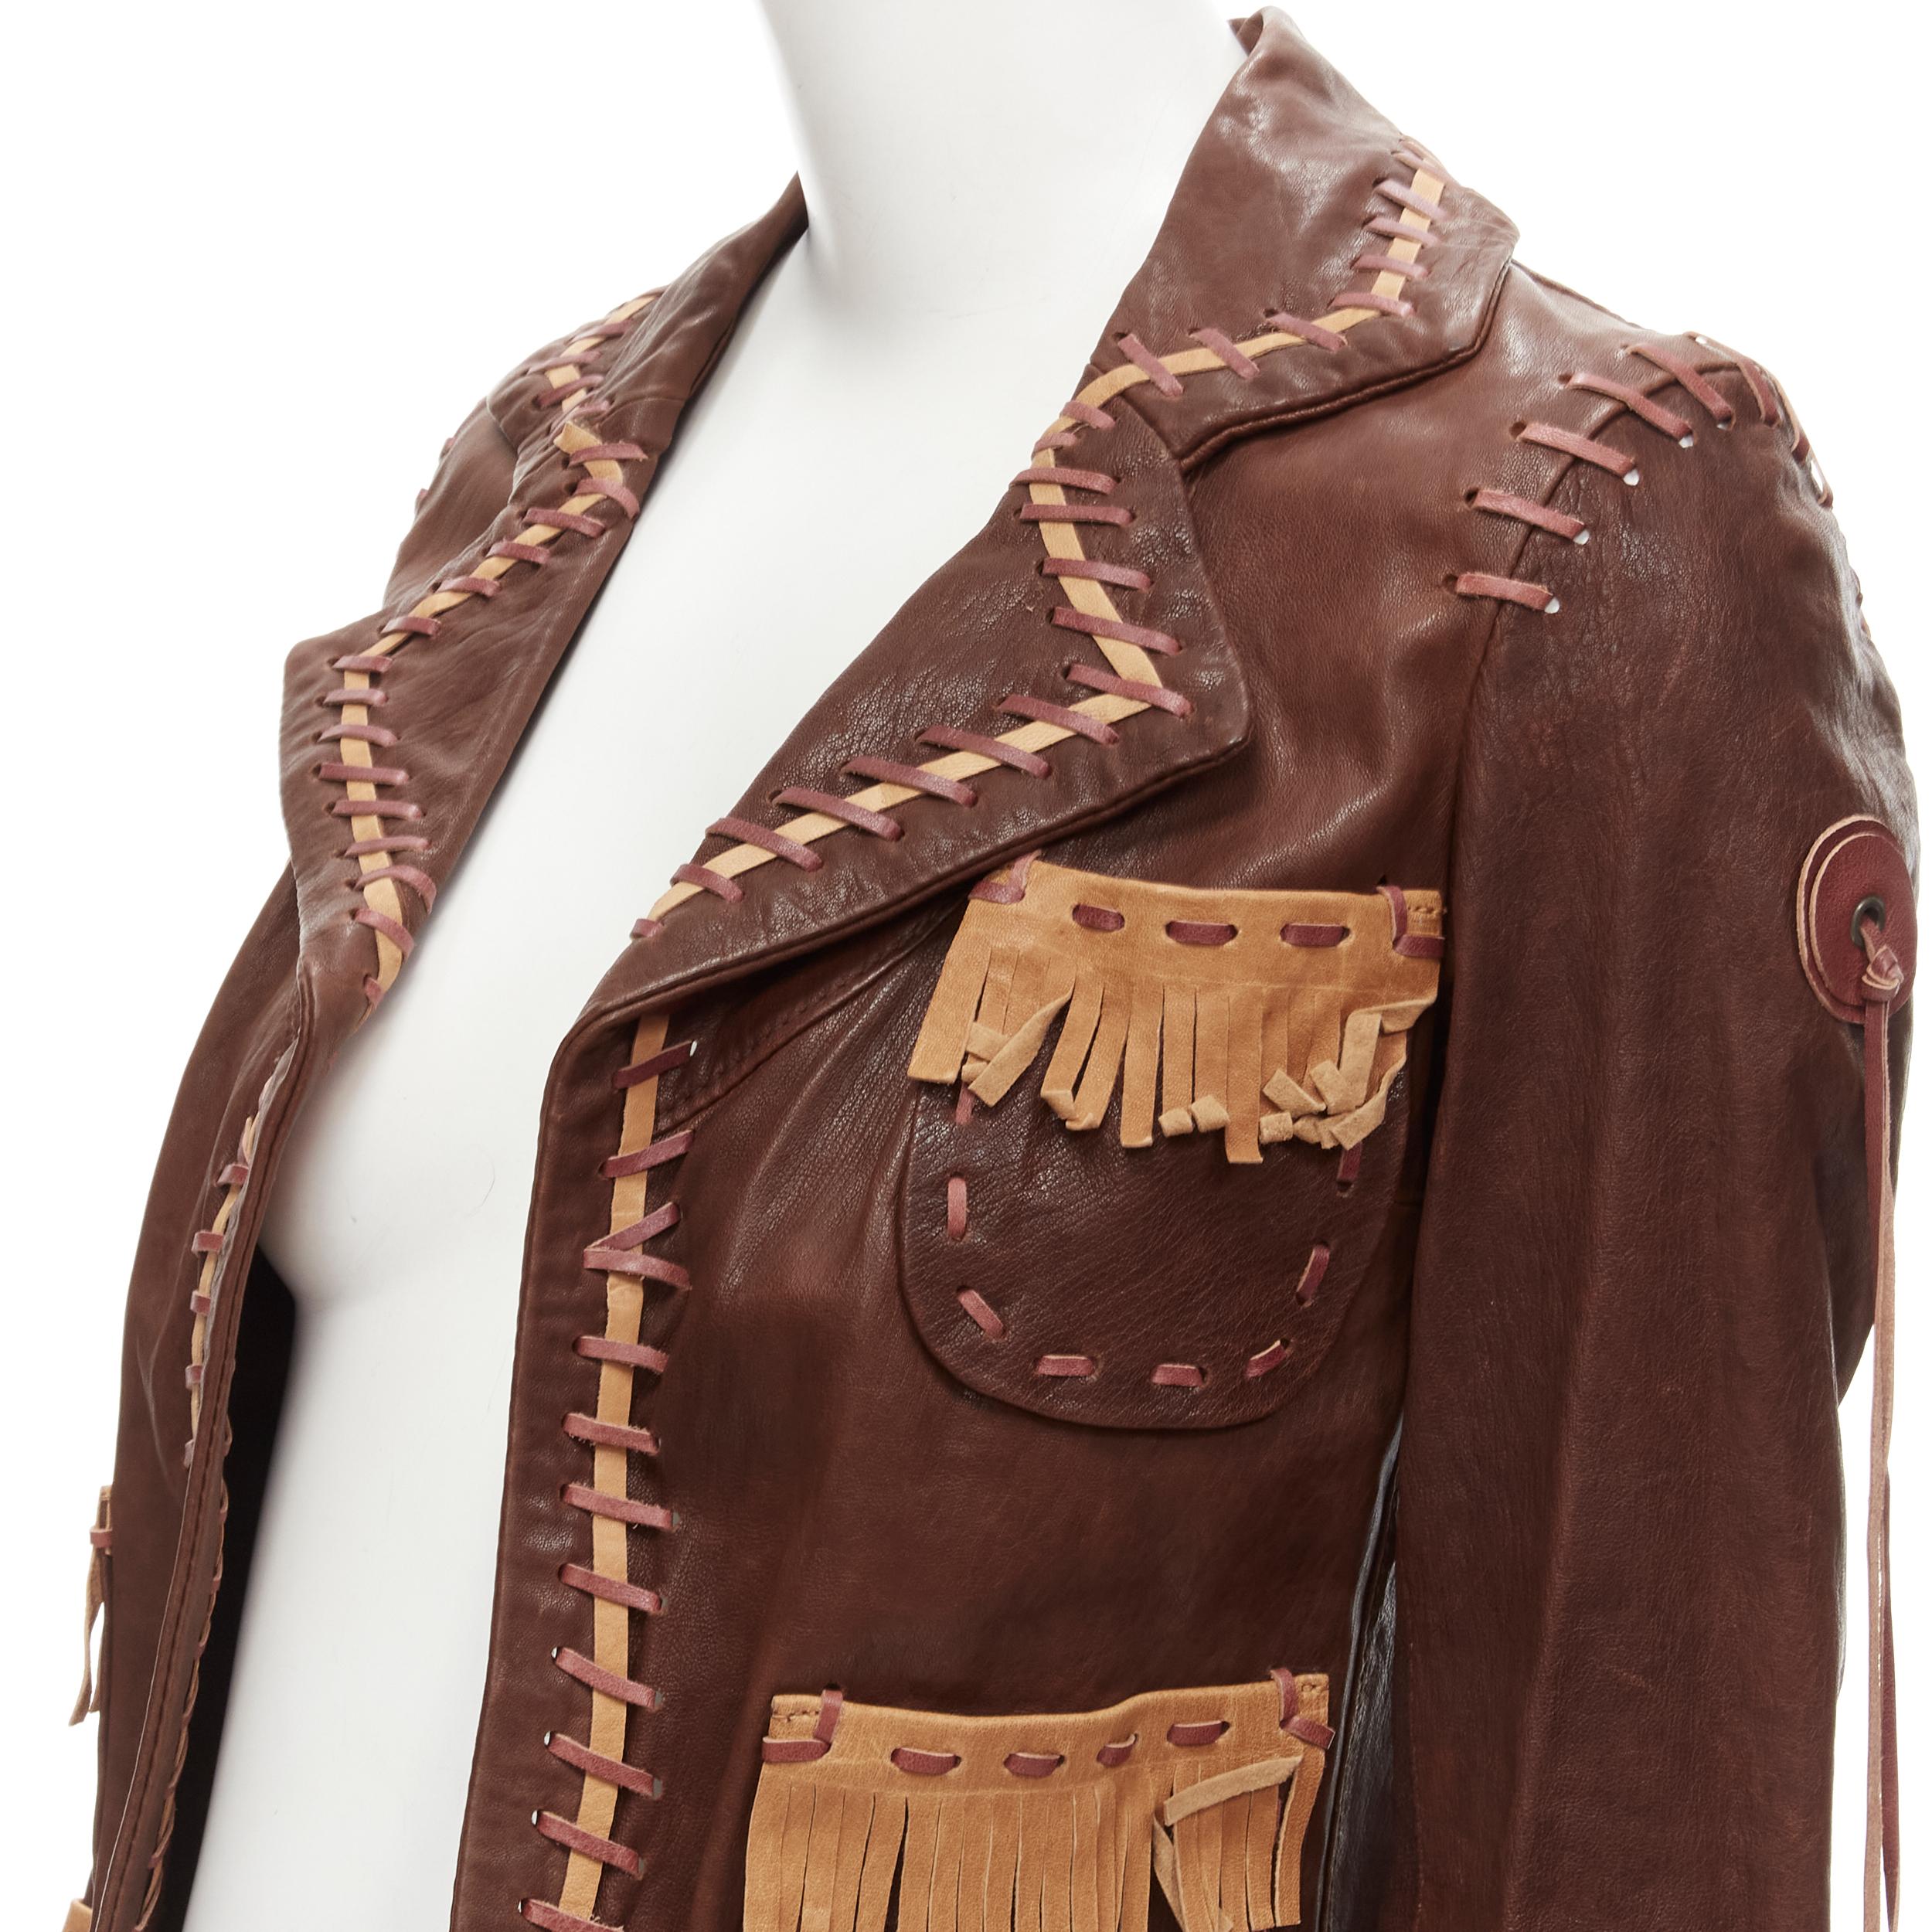 DSQUARED2 2005 Vintage Native American brown leather fringe leather jacket IT38
Brand: Dsquared2
Collection: 2005 Runway
Material: Leather
Color: Brown
Pattern: Solid
Extra Detail: Native American inspired. Brown leather with whipstitch detailing.